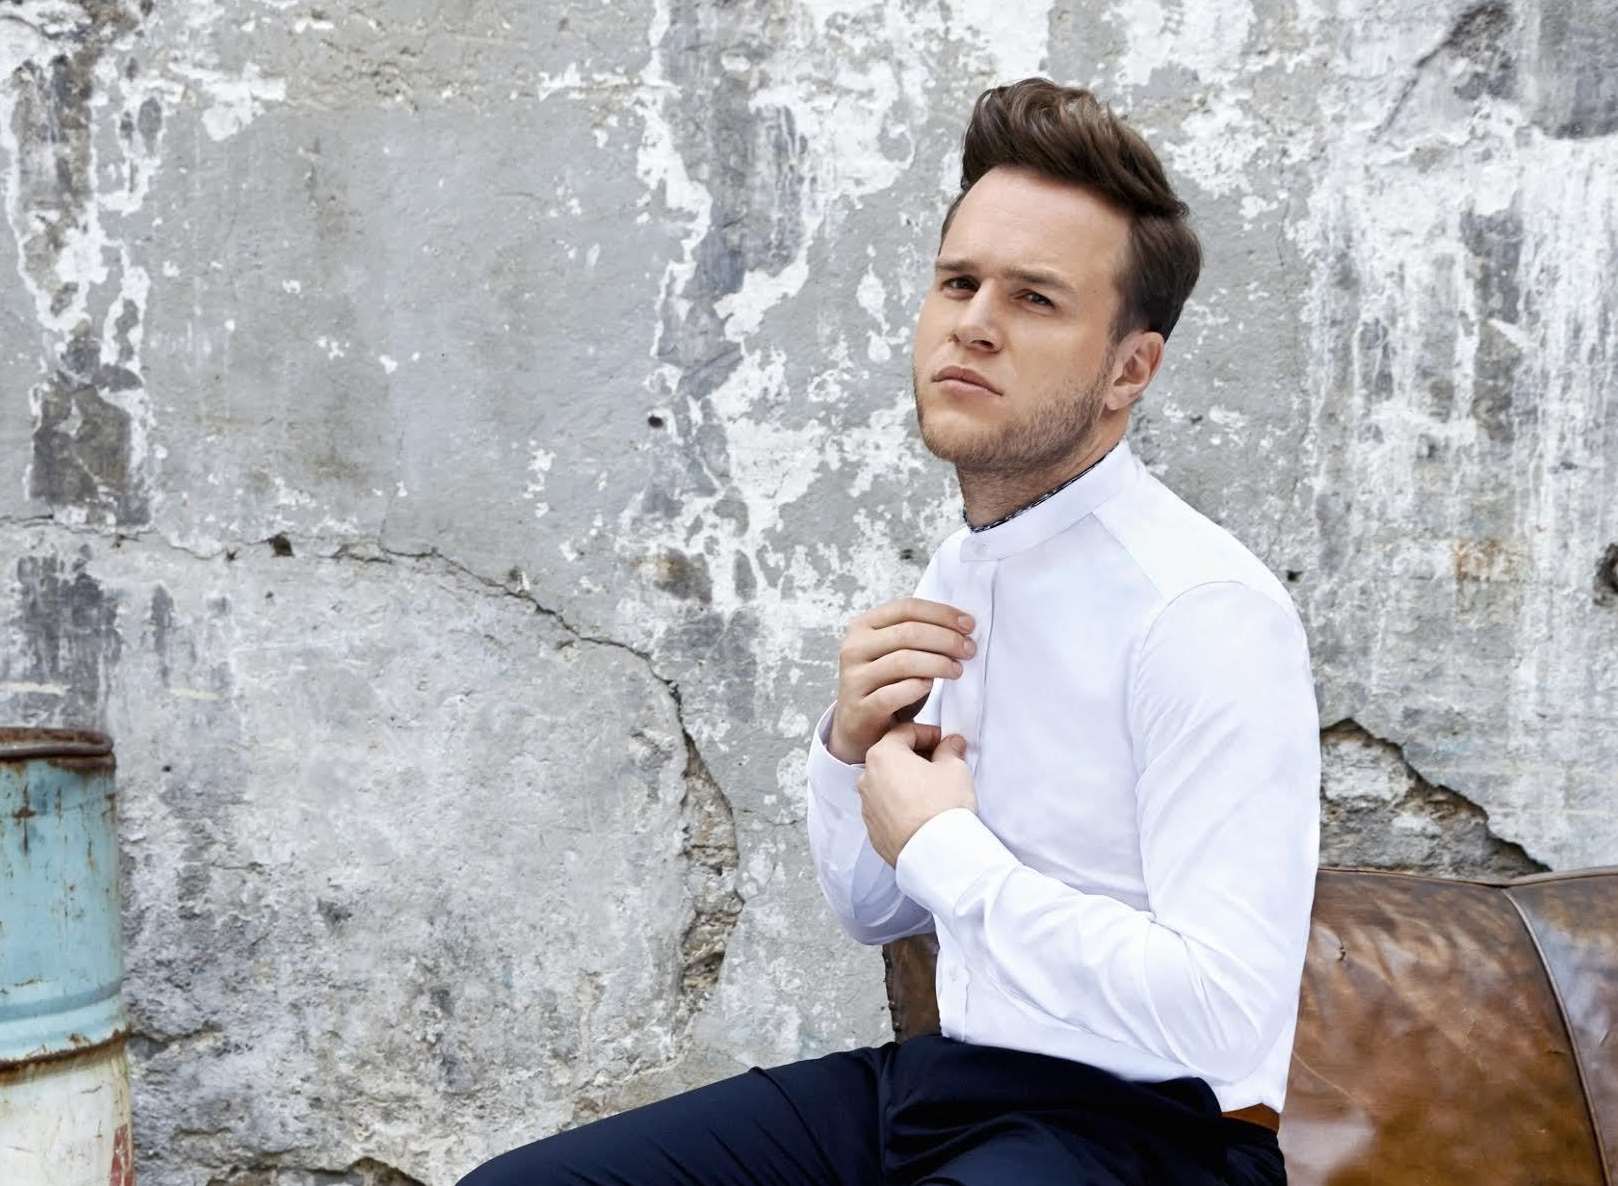 Olly Murs will play at Canterbury's Spitfire Ground